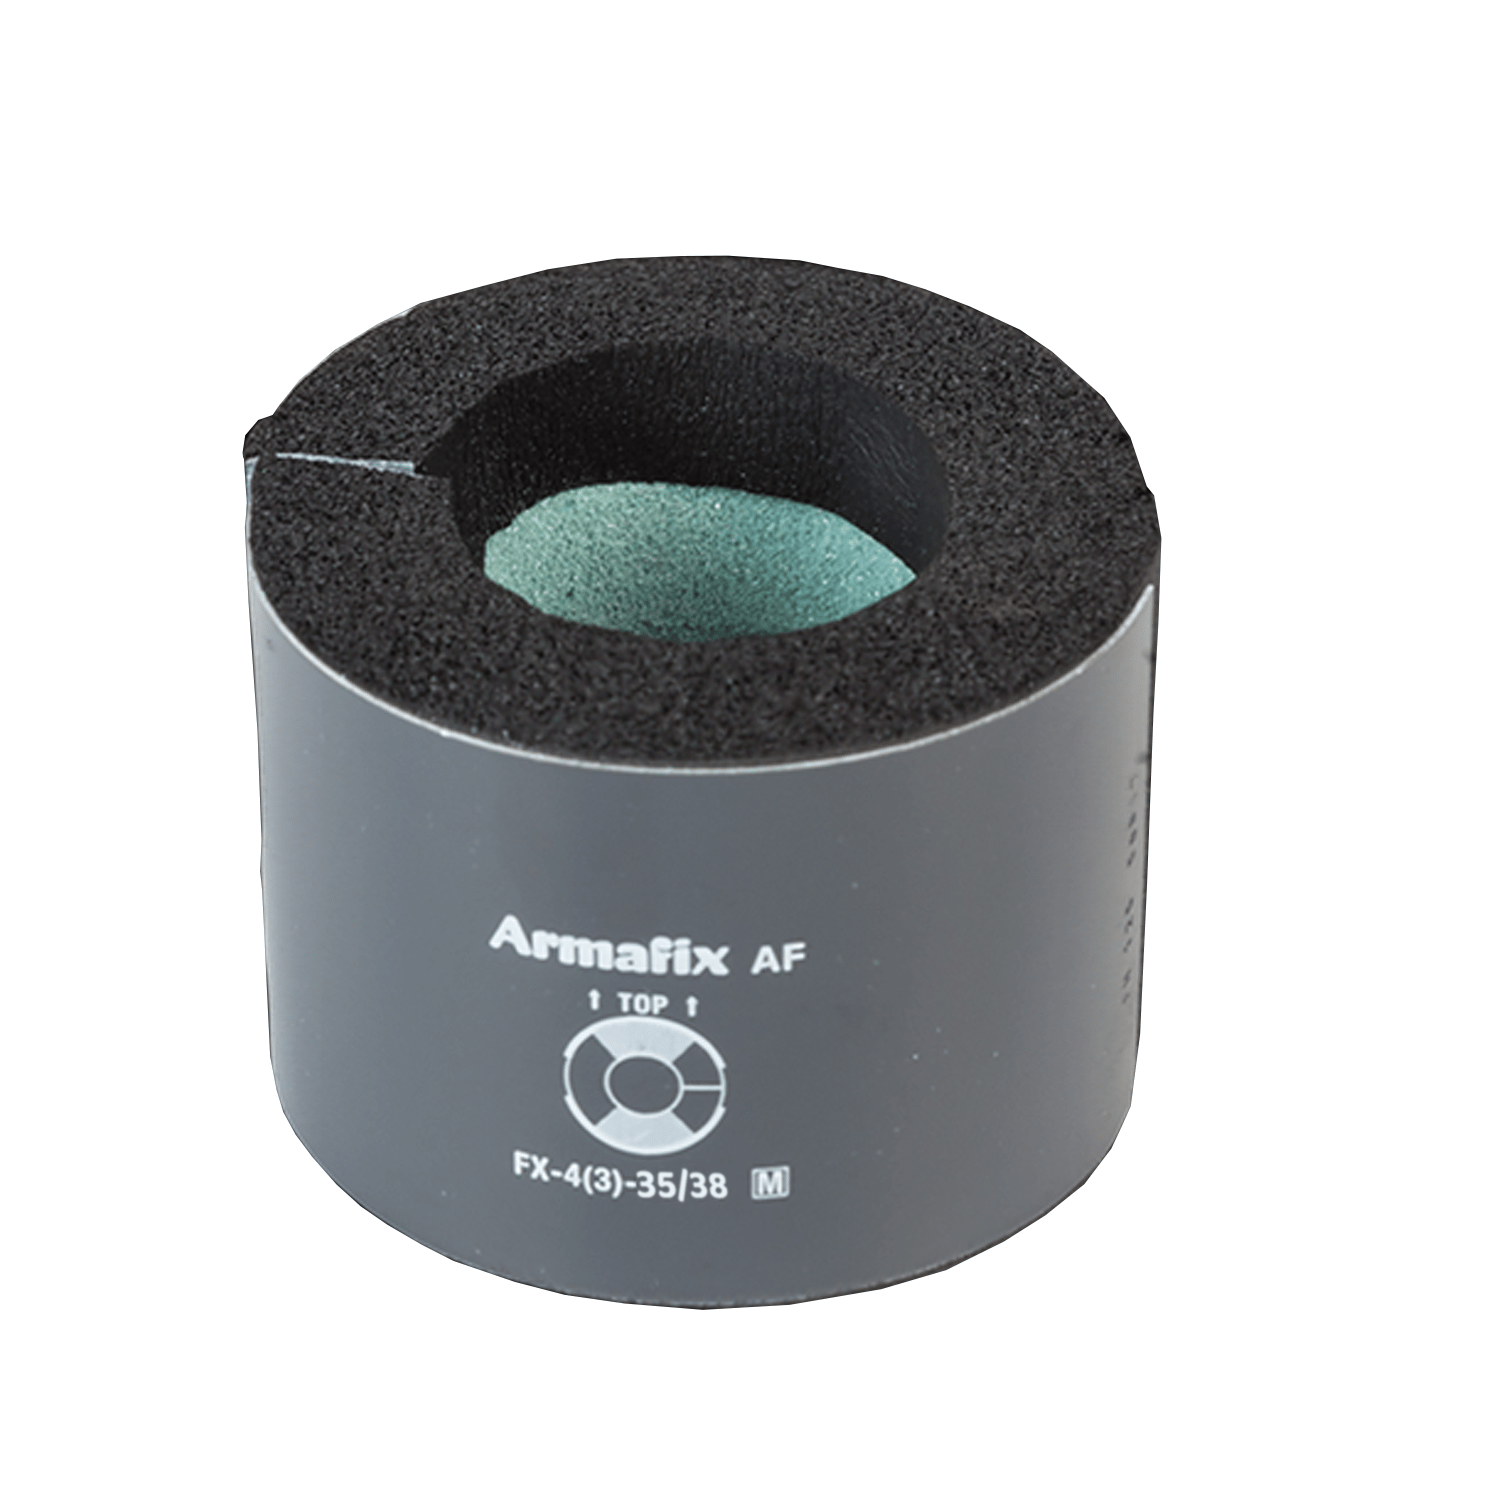 Pipe support, outer Ø 74-79 mm ARMAFLEX ARMAFIX FX-4 (3)-35/38 +